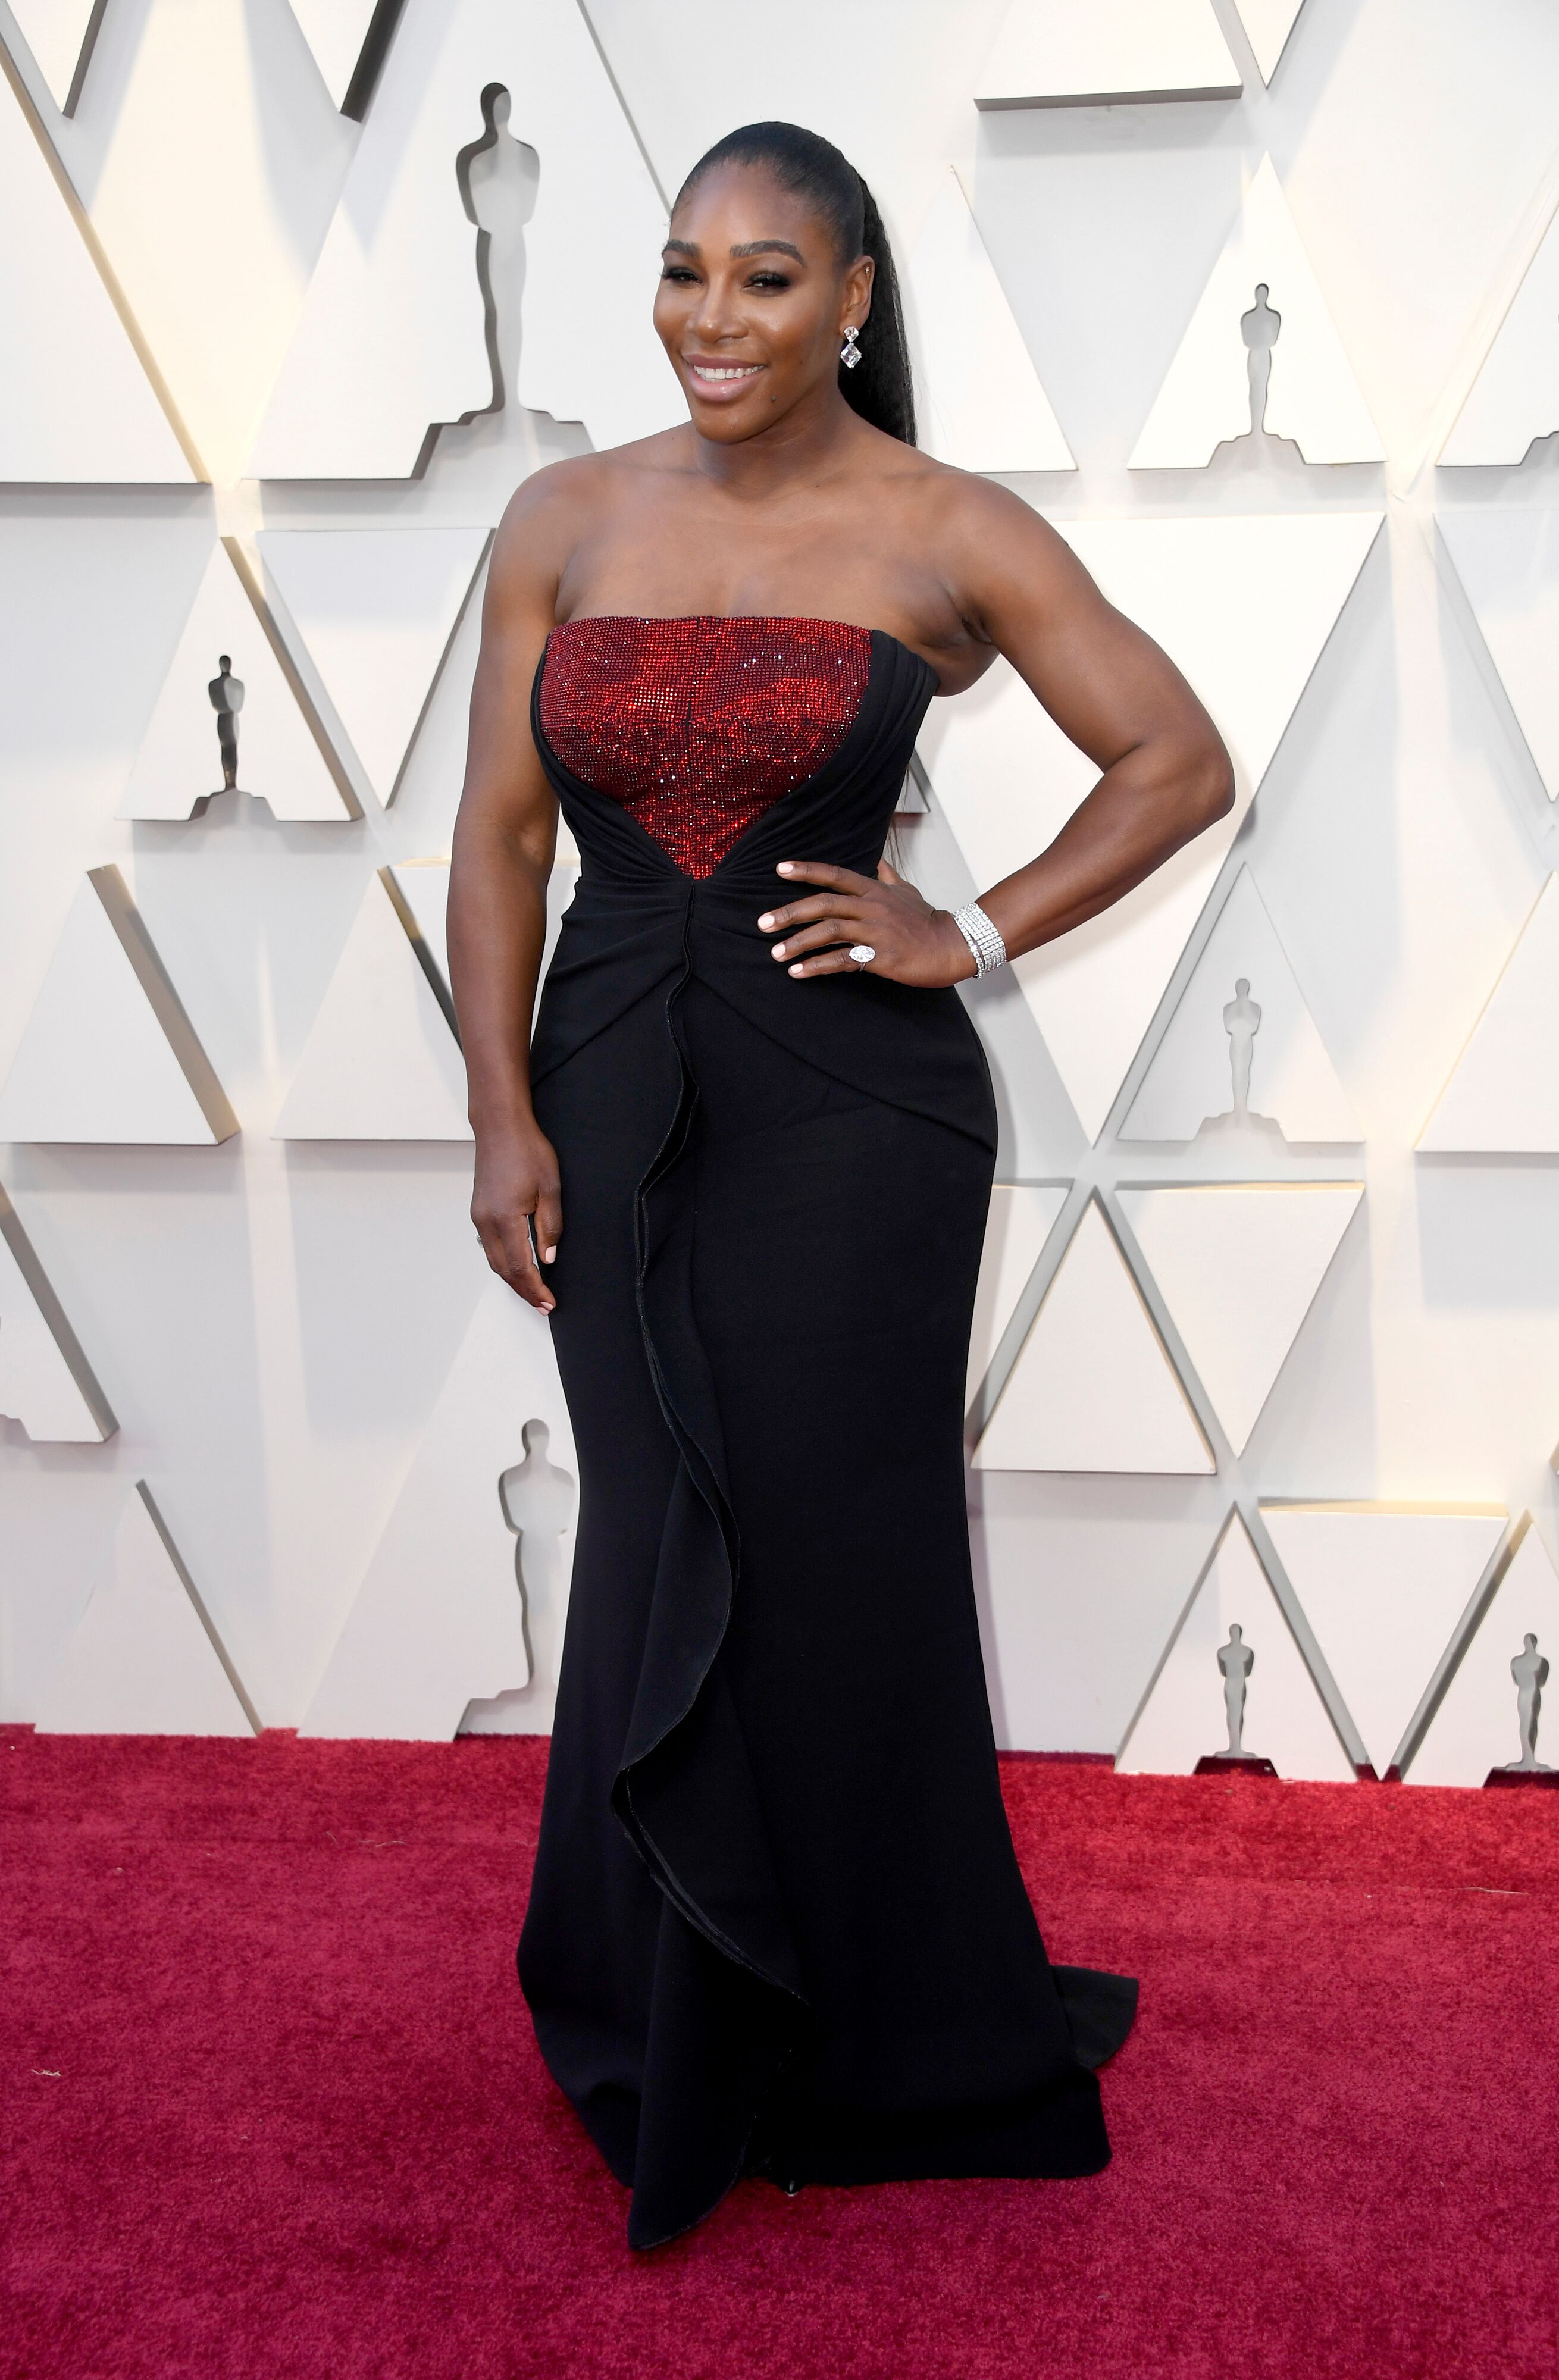 Serena Williams at the Academy Awards/ Source: Getty Images